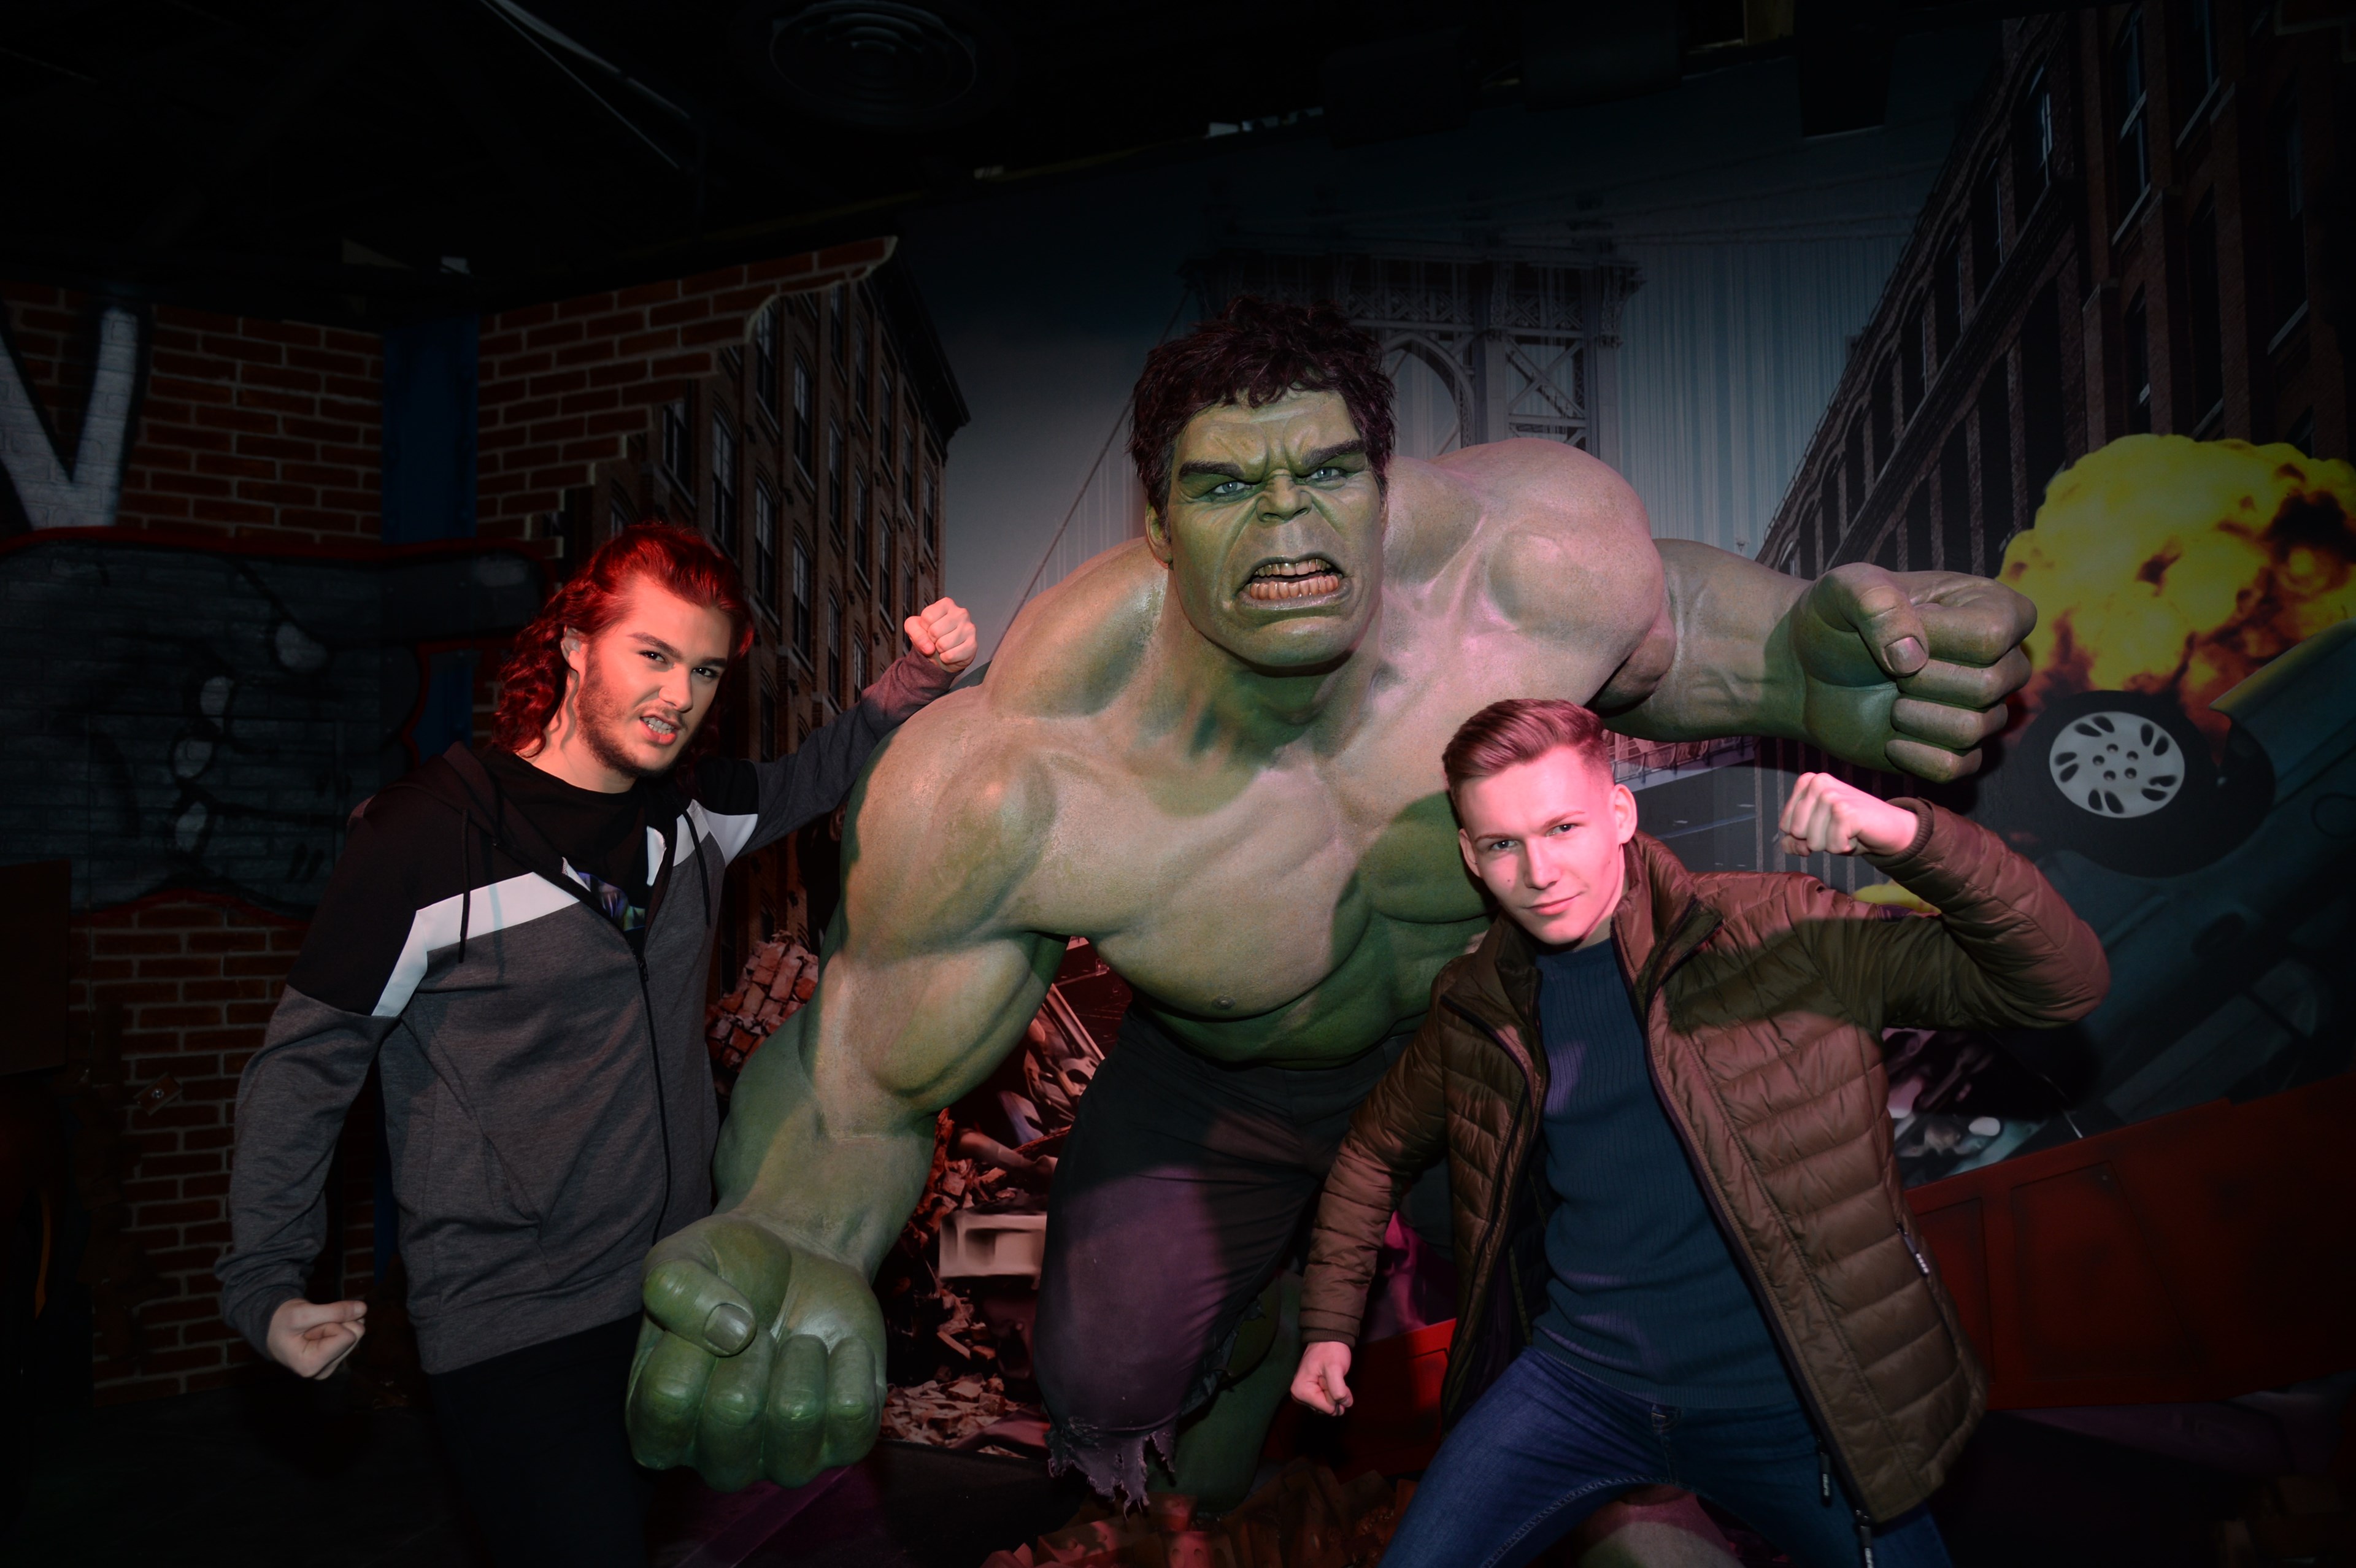 Guests next to Thor wax figure at Madame Tussauds Blackpool